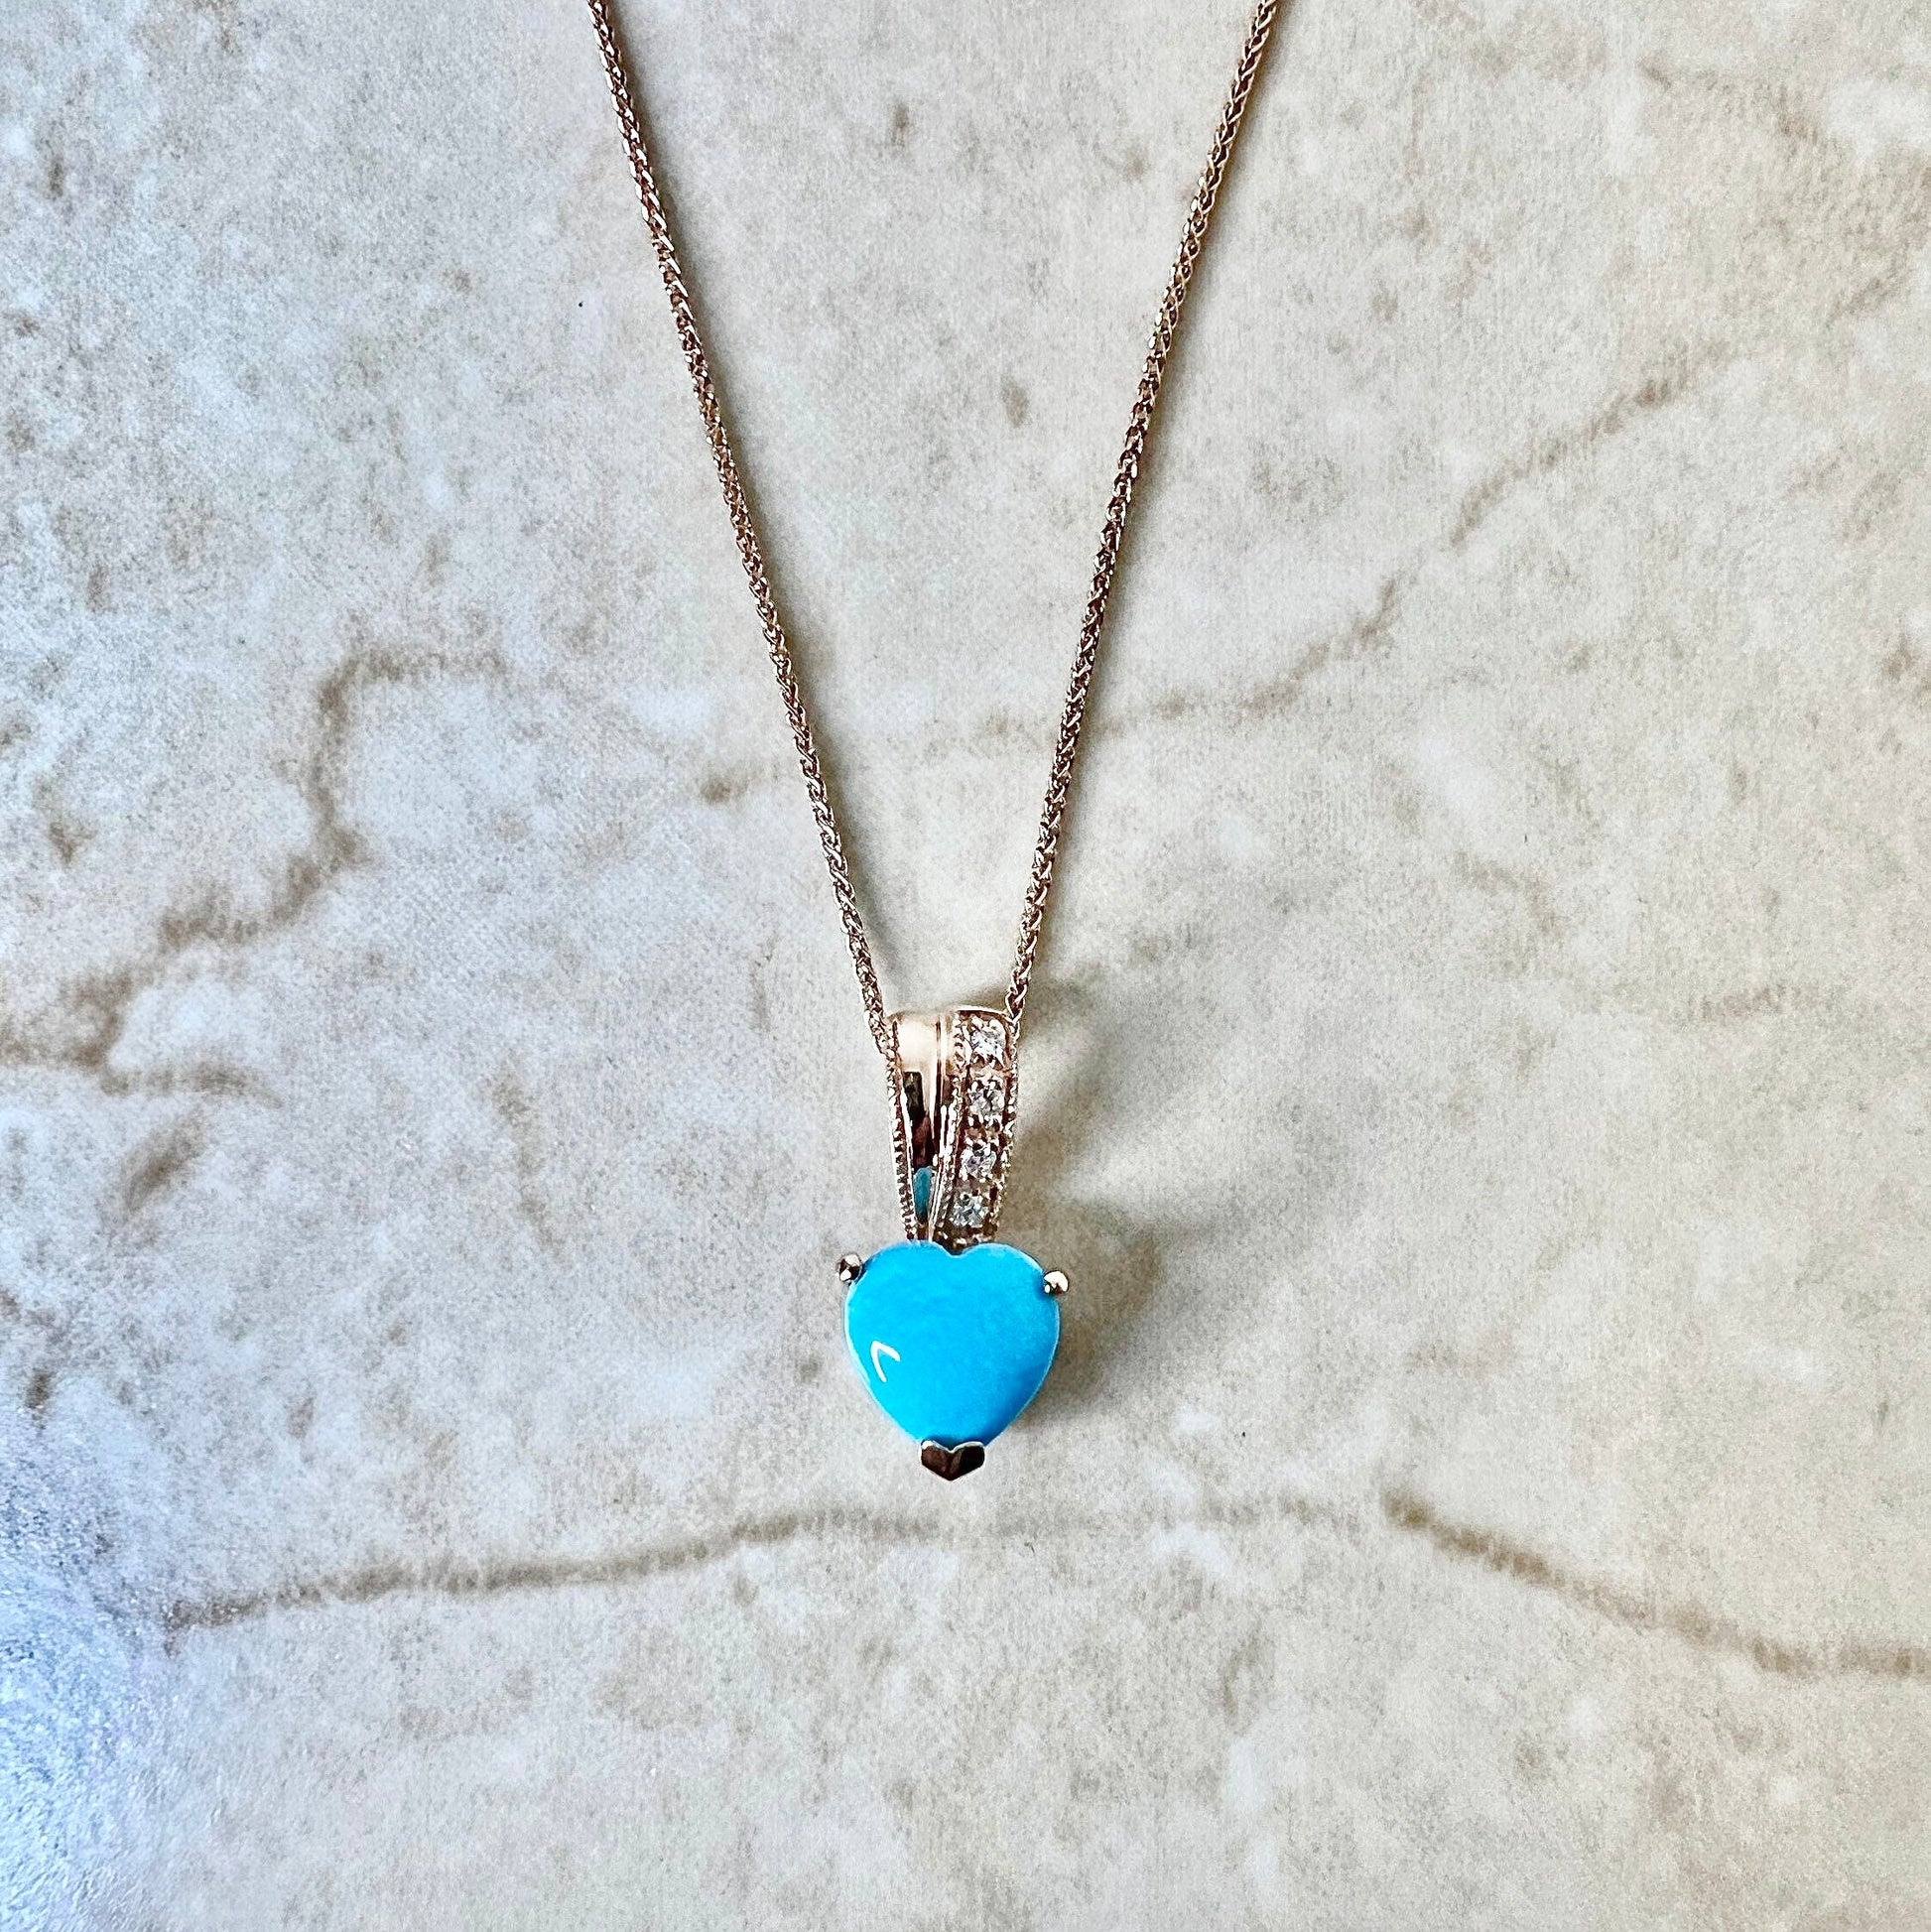 14K Turquoise And Diamond Heart Cocktail Ring & Pendant Necklace Set - Rose Gold Turquoise Set - Jewelry Set - Valentine’s Day Gifts For Her